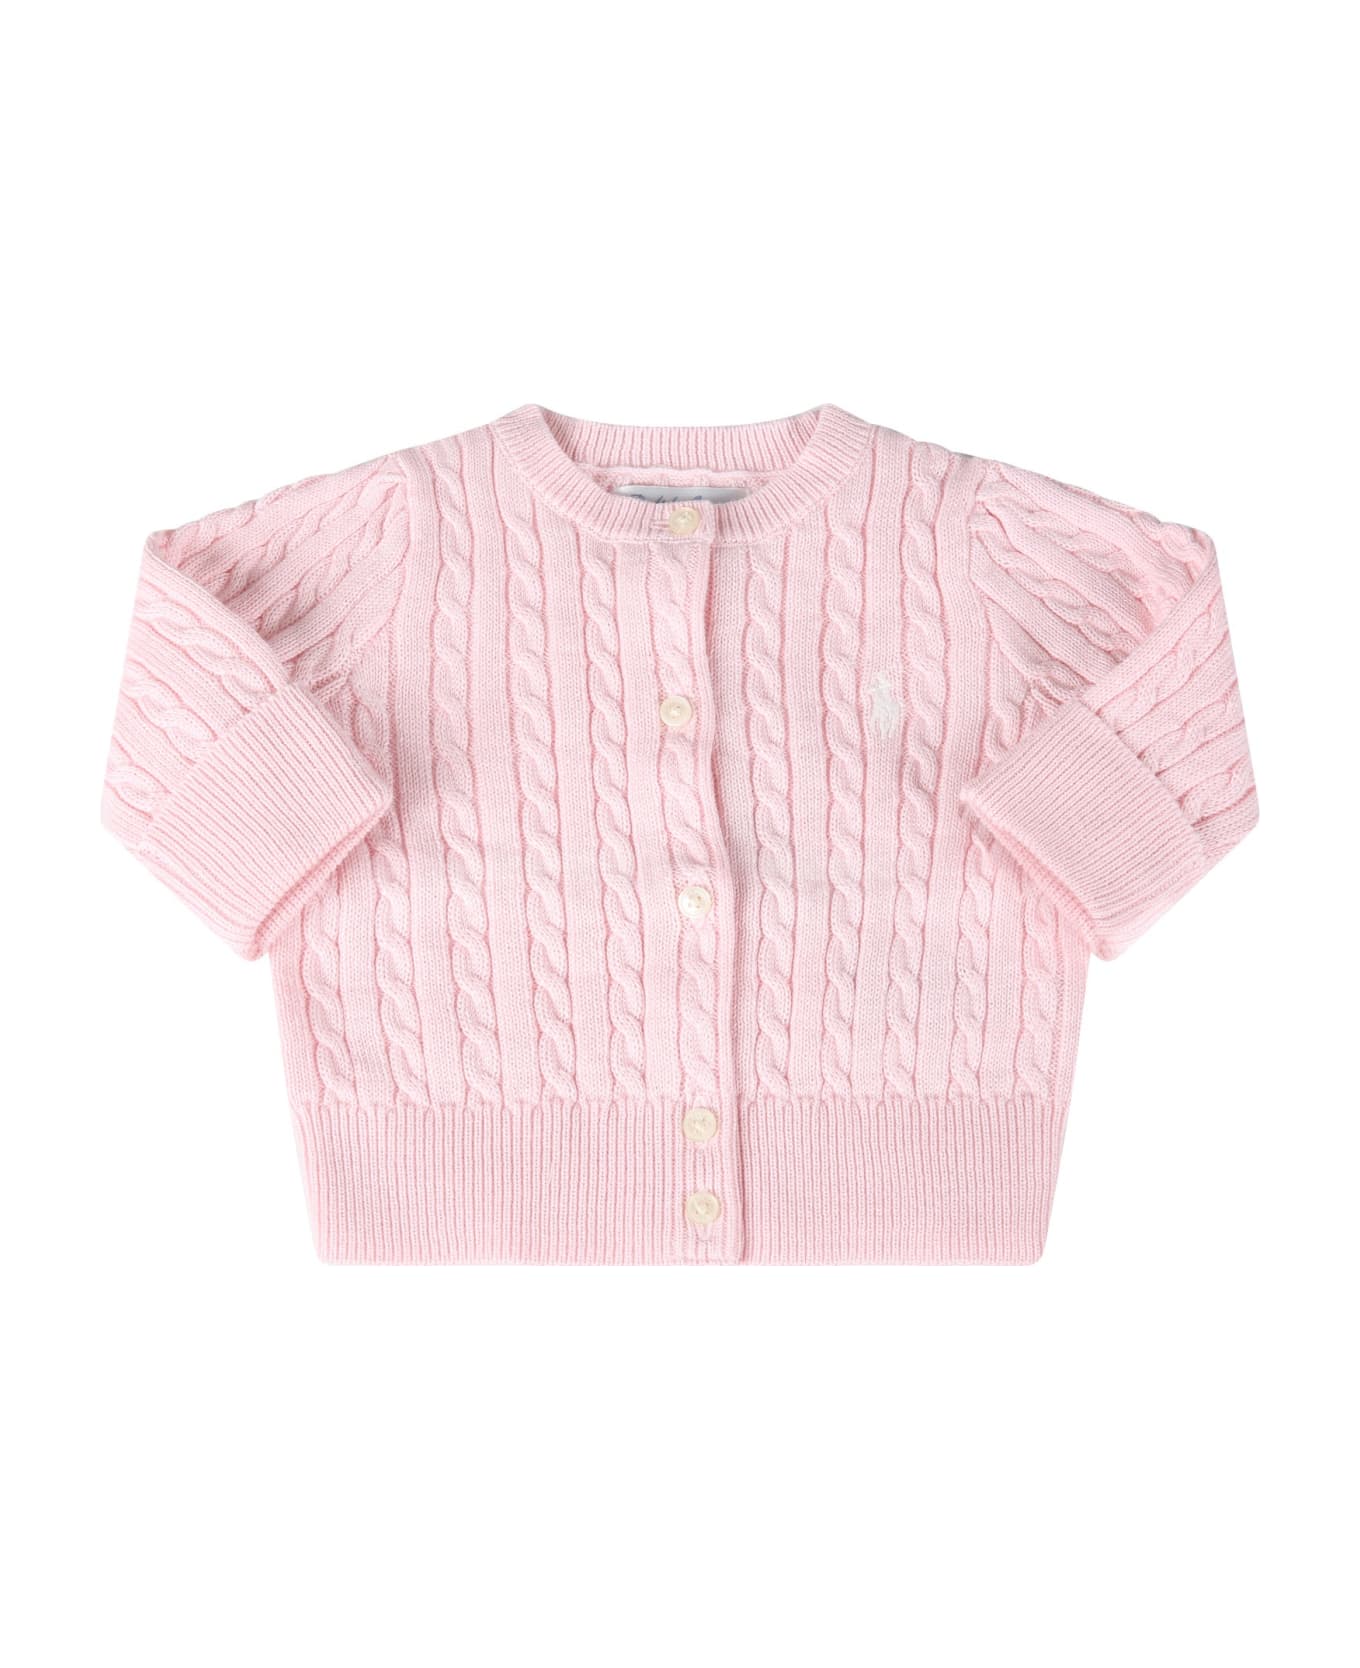 Ralph Lauren Pink Cardigan For Babygirl With Iconic Pony - Pink